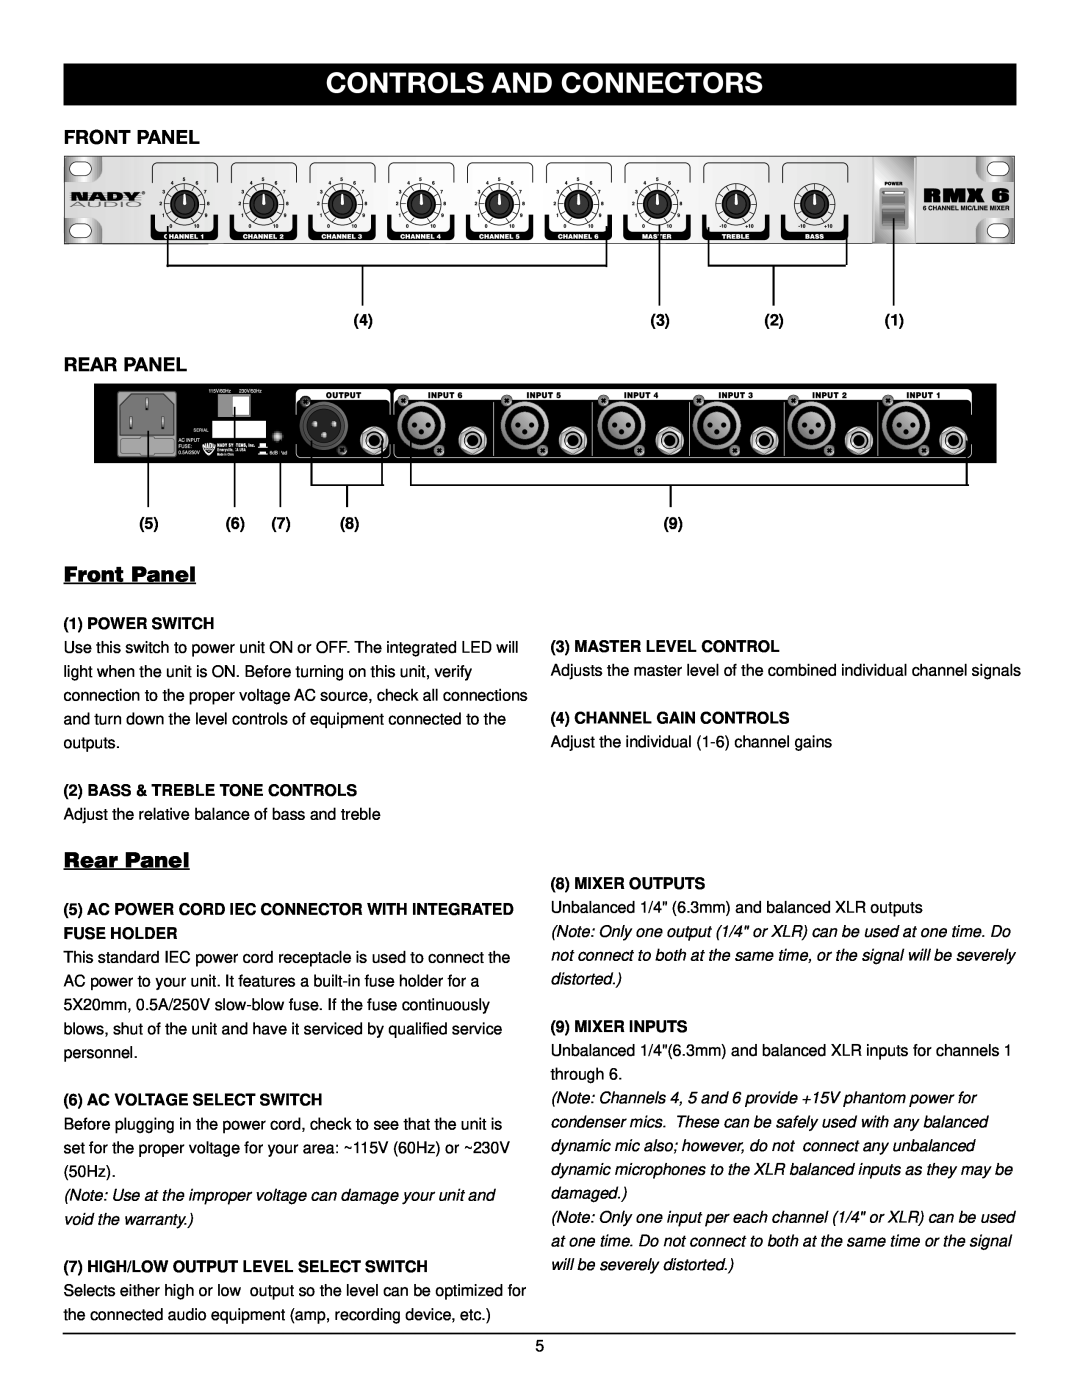 Nady Systems RMX6 owner manual Controls And Connectors, Front Panel, Rear Panel 